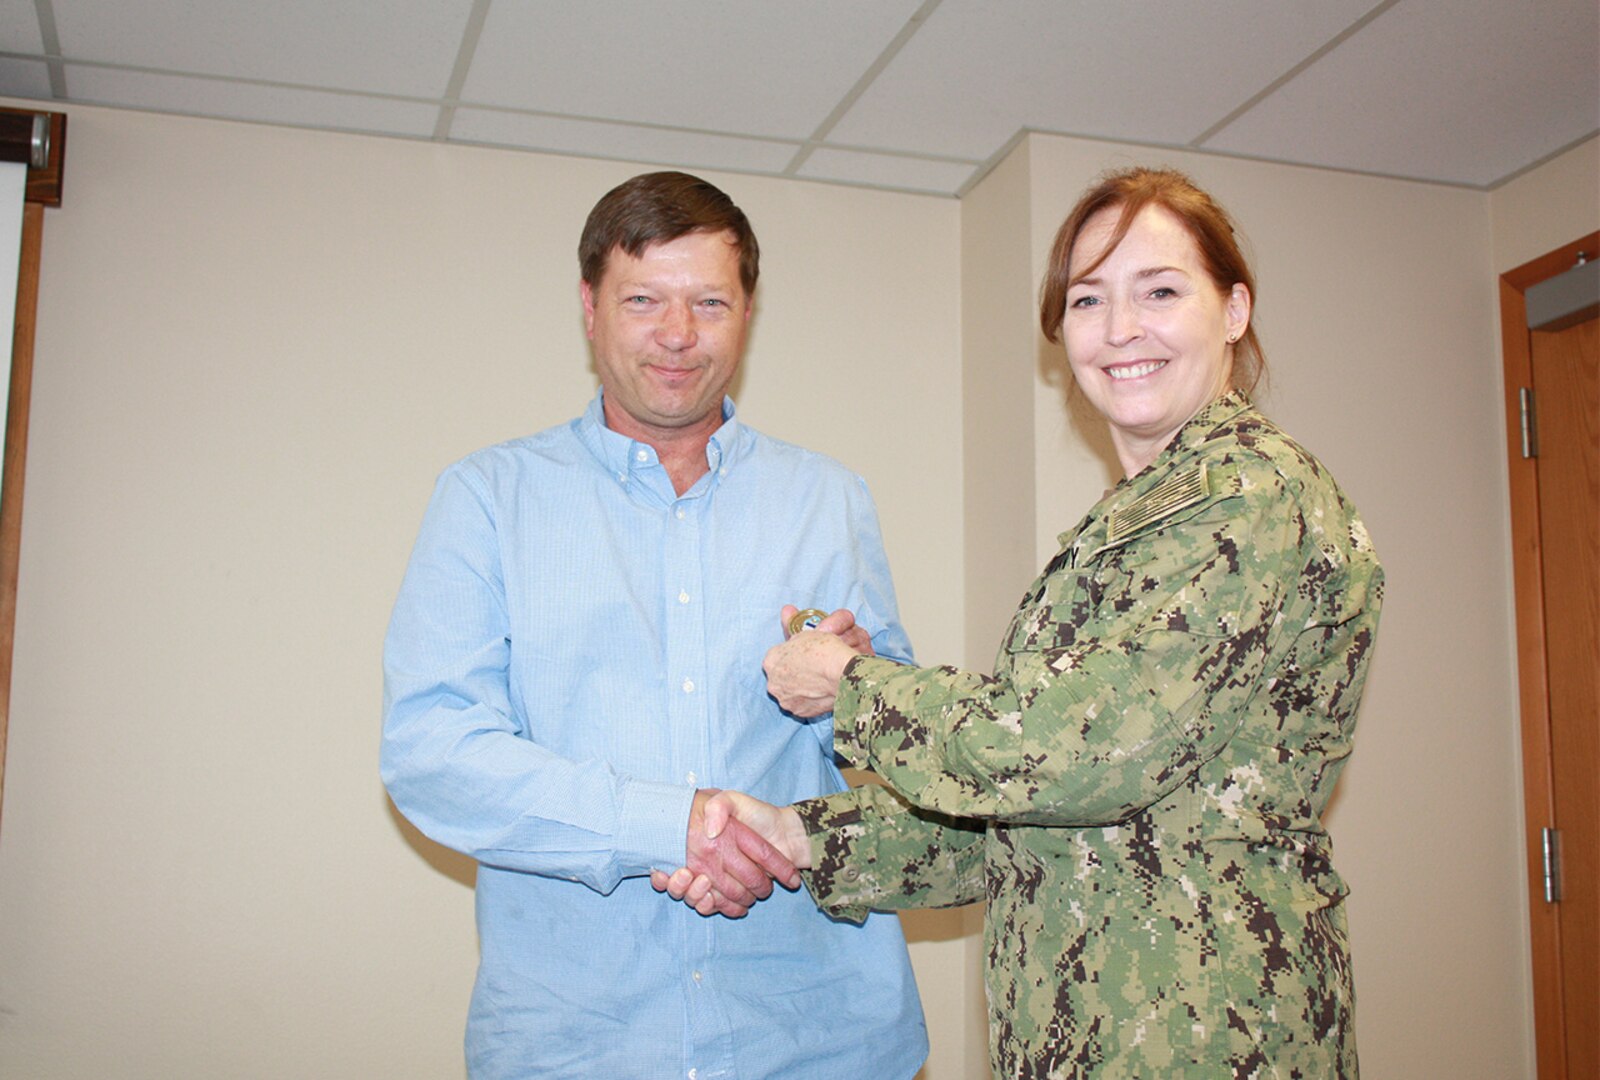 Defense Logistics Agency Land and Maritime Commander Navy Rear Adm. Michelle Skubic presents her commander’s coin for excellence to John Iverson during a July 10 site visit and review at DLA Maritime at Puget Sound Naval Shipyard in Bremerton, Wash. Iversen is a purchasing agent at DLA Maritime at Puget Sound.